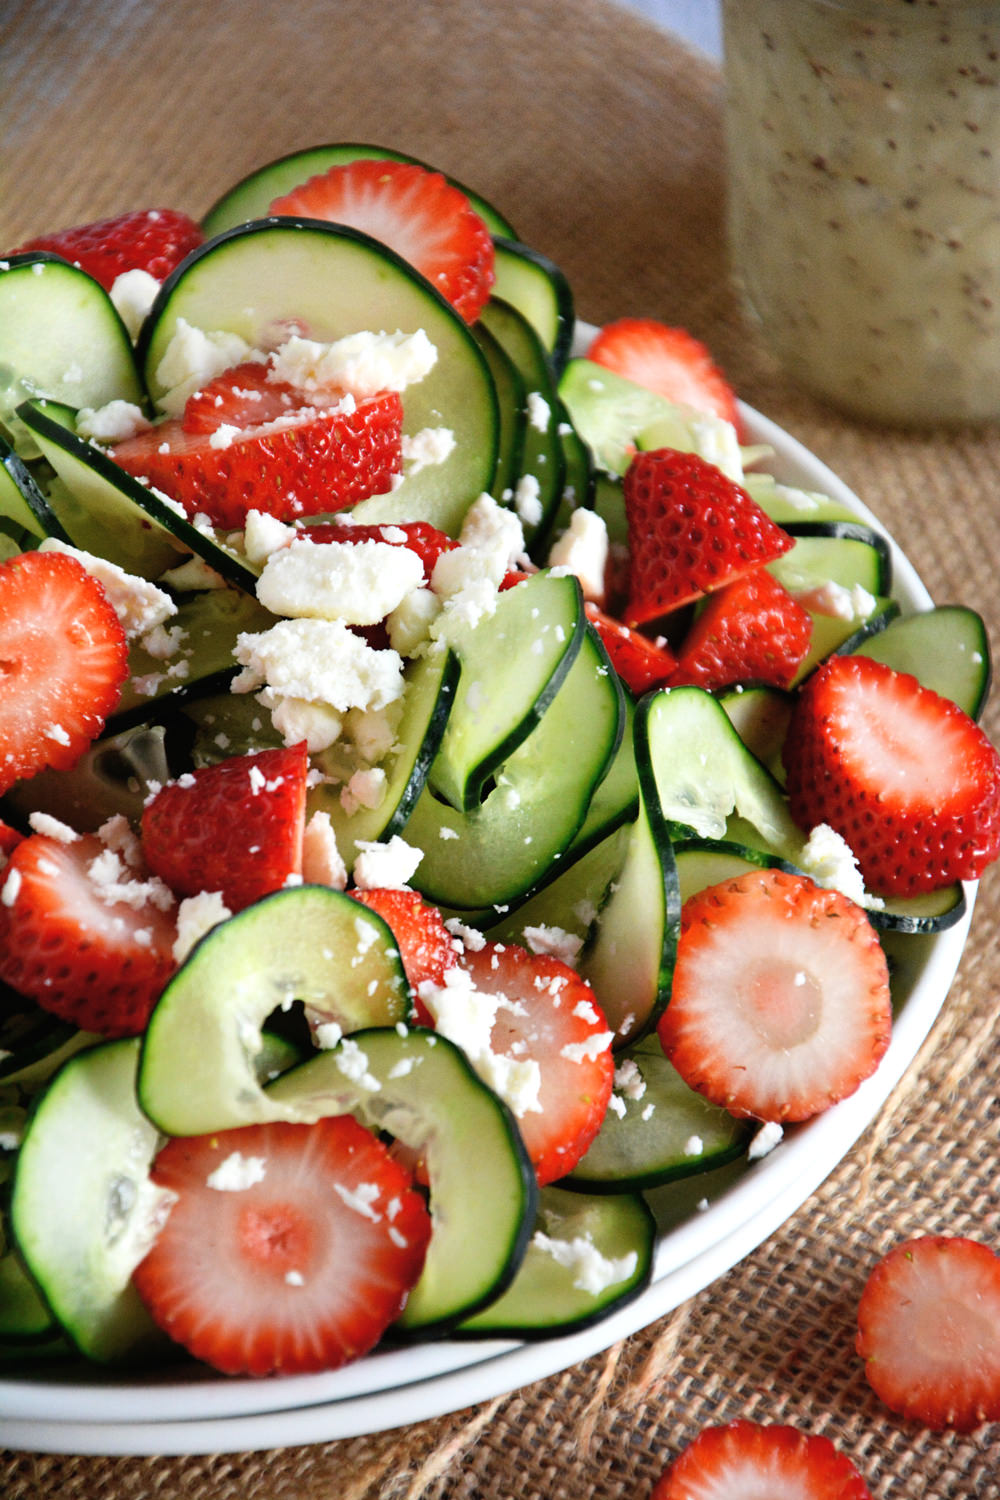 A refreshing and crisp salad with spiralized cucumbers, juicy strawberries and feta salad all topped with a fruity poppyseed dressing!